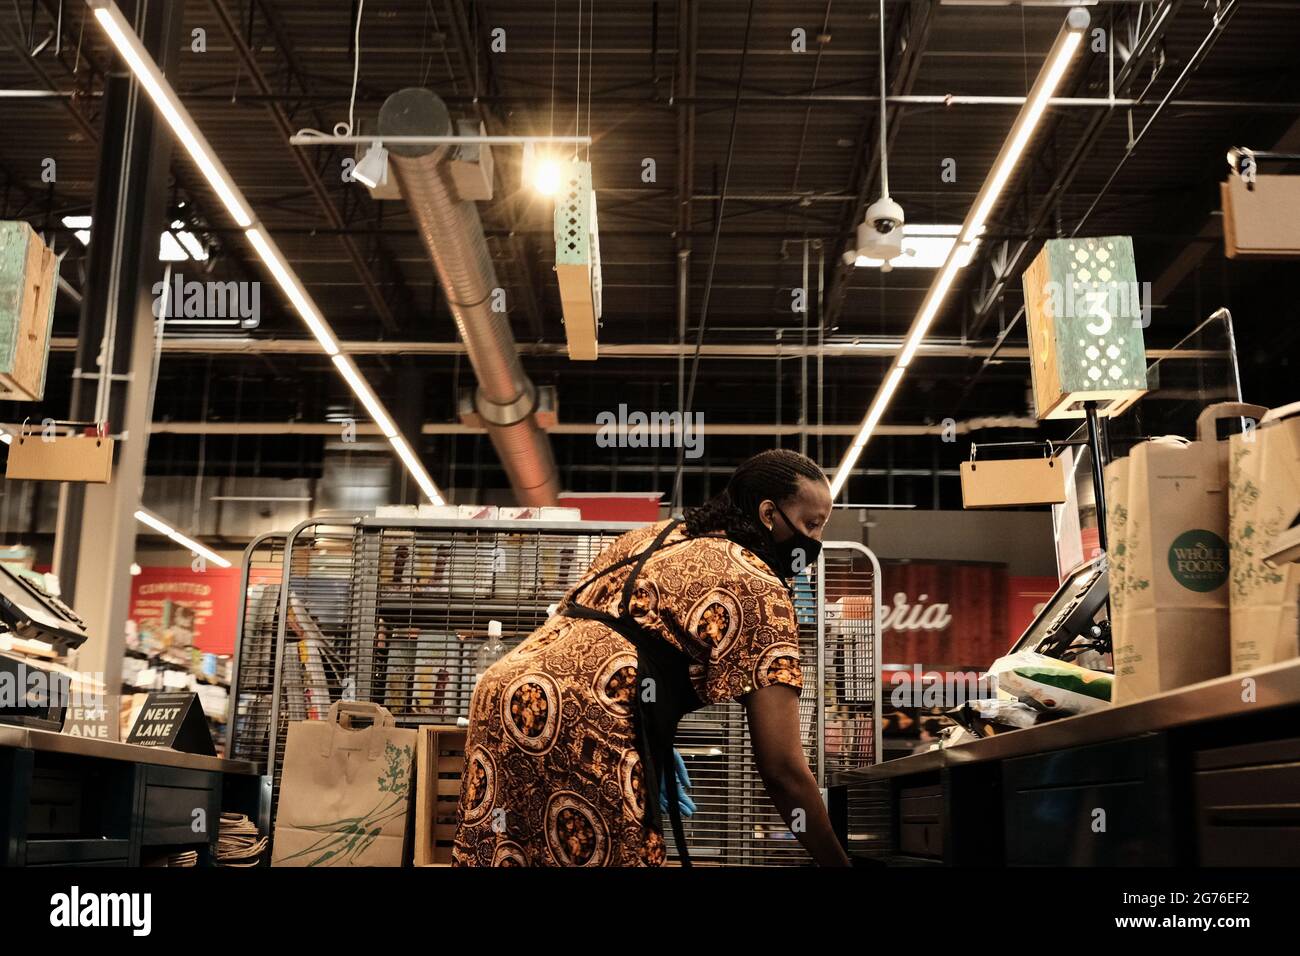 Cashier behind the till packs up a customer's shopping bags at the Whole Foods Market, Lansdowne, Ottawa, Ontario, Canada. Stock Photo